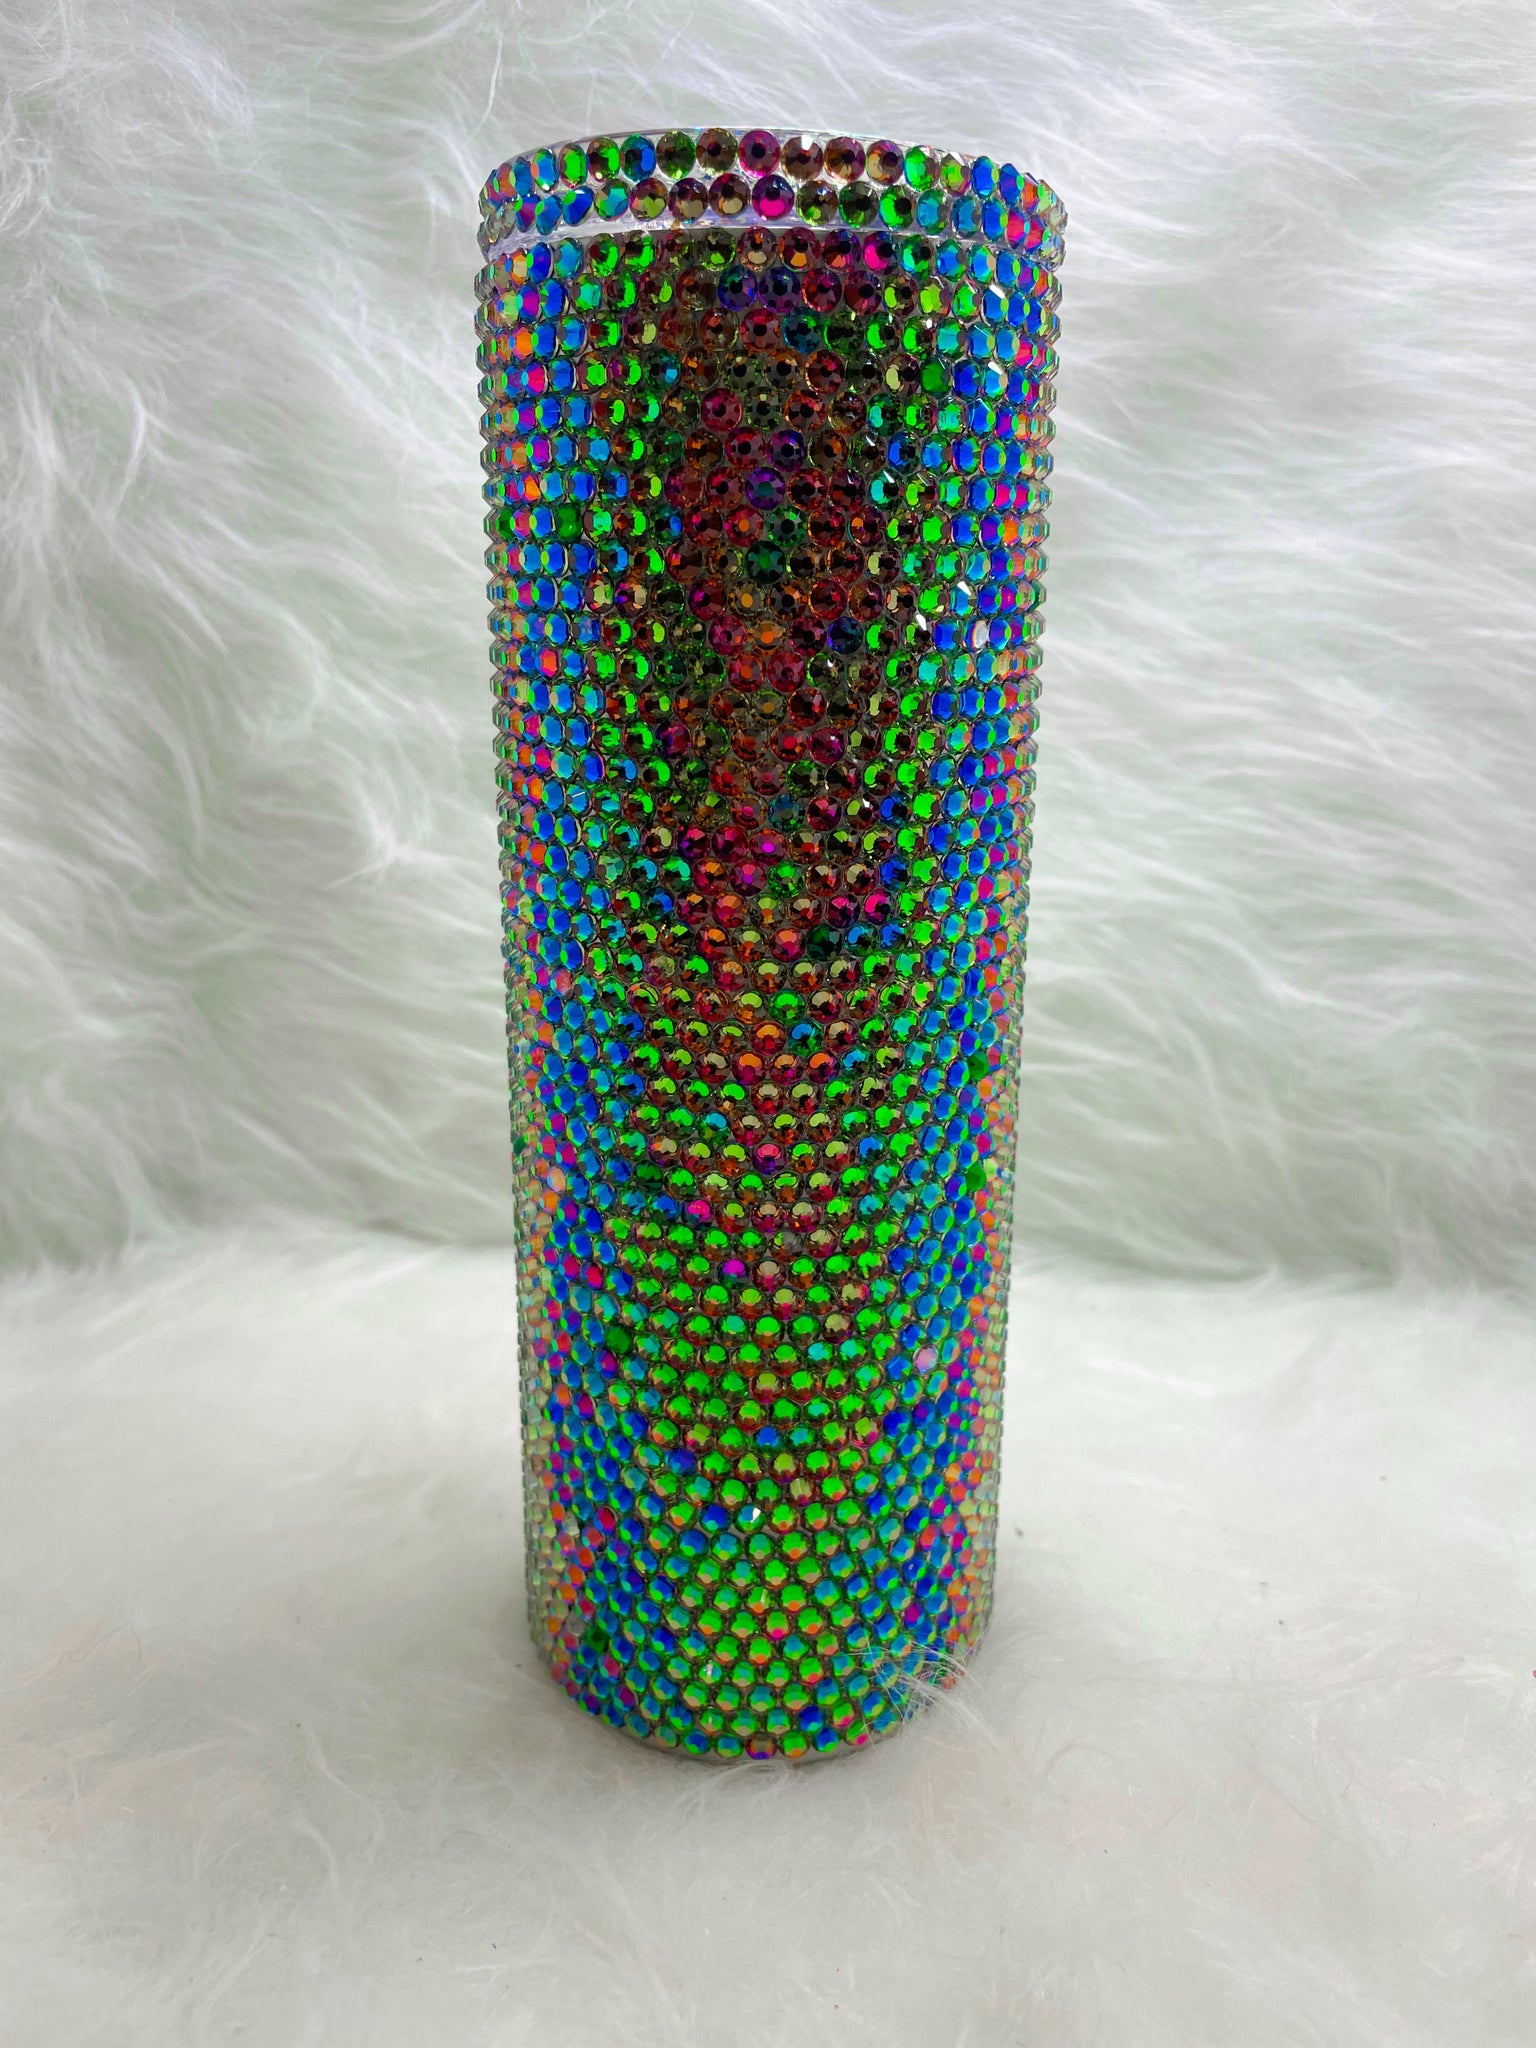 Design Your Own Rhinestone Tumblers by Cr8tive Release Gifts